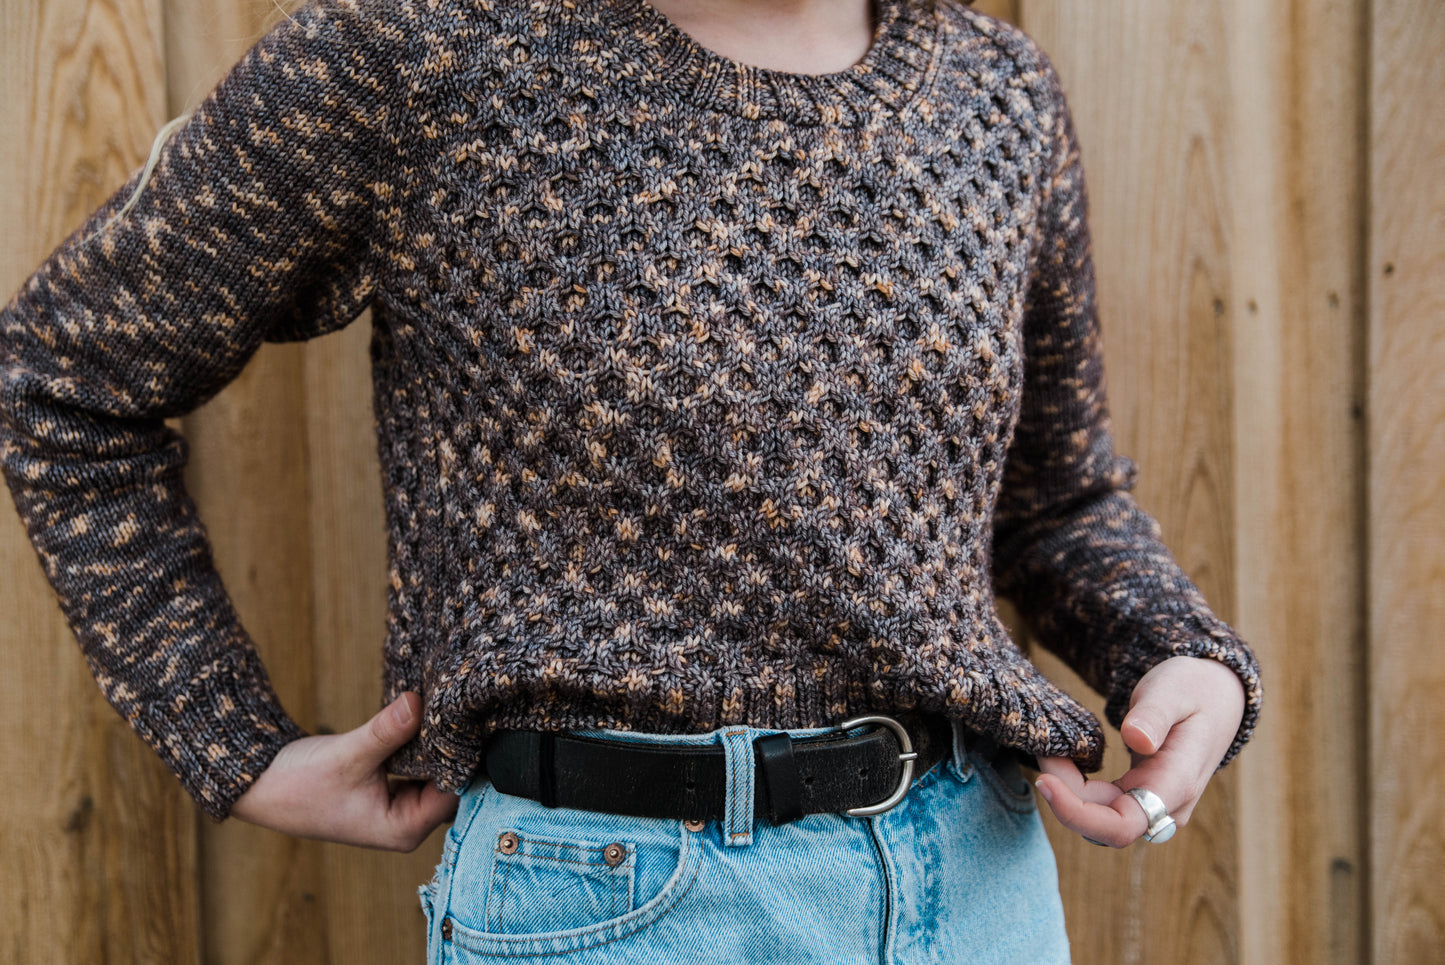 Haley, seen from the shoulder downs, tucks the edge of her honeycomb cable knit sweater into her blue jeans. The sweater is knit with brown, variegated yarn.